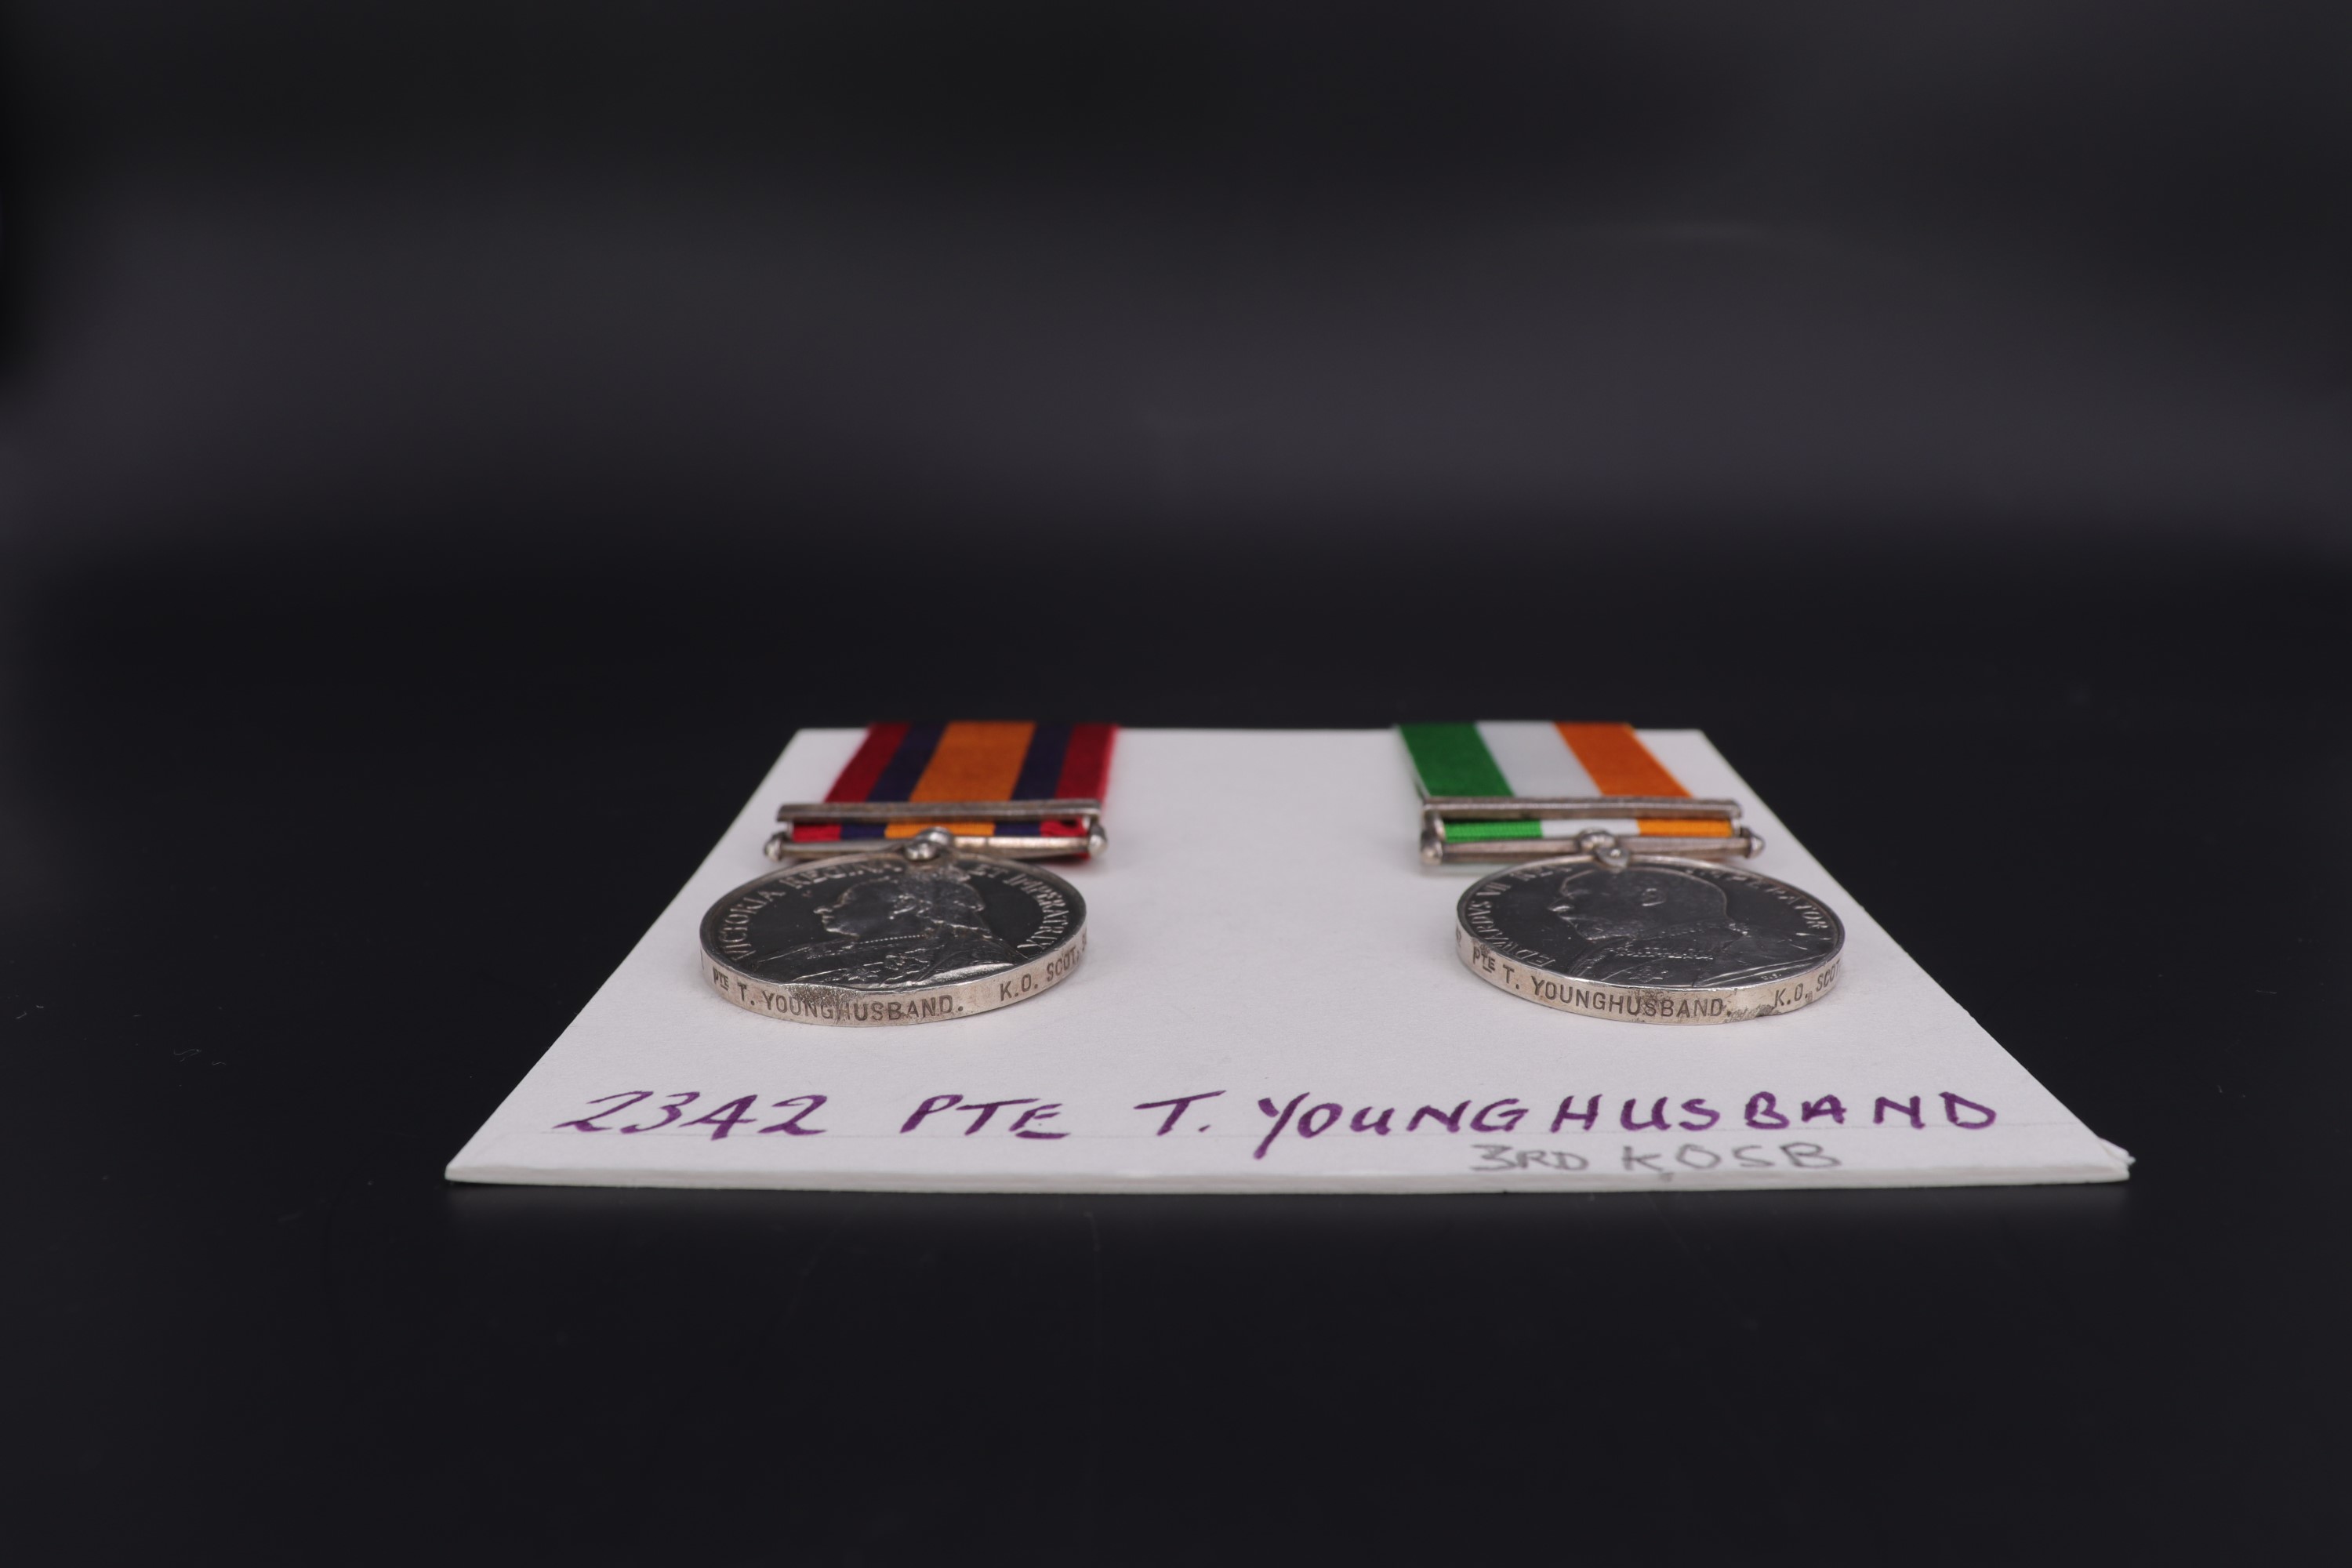 Queen's and King's South Africa medals to 2342 Pte T Younghusband, 3rd KOSB - Image 2 of 2